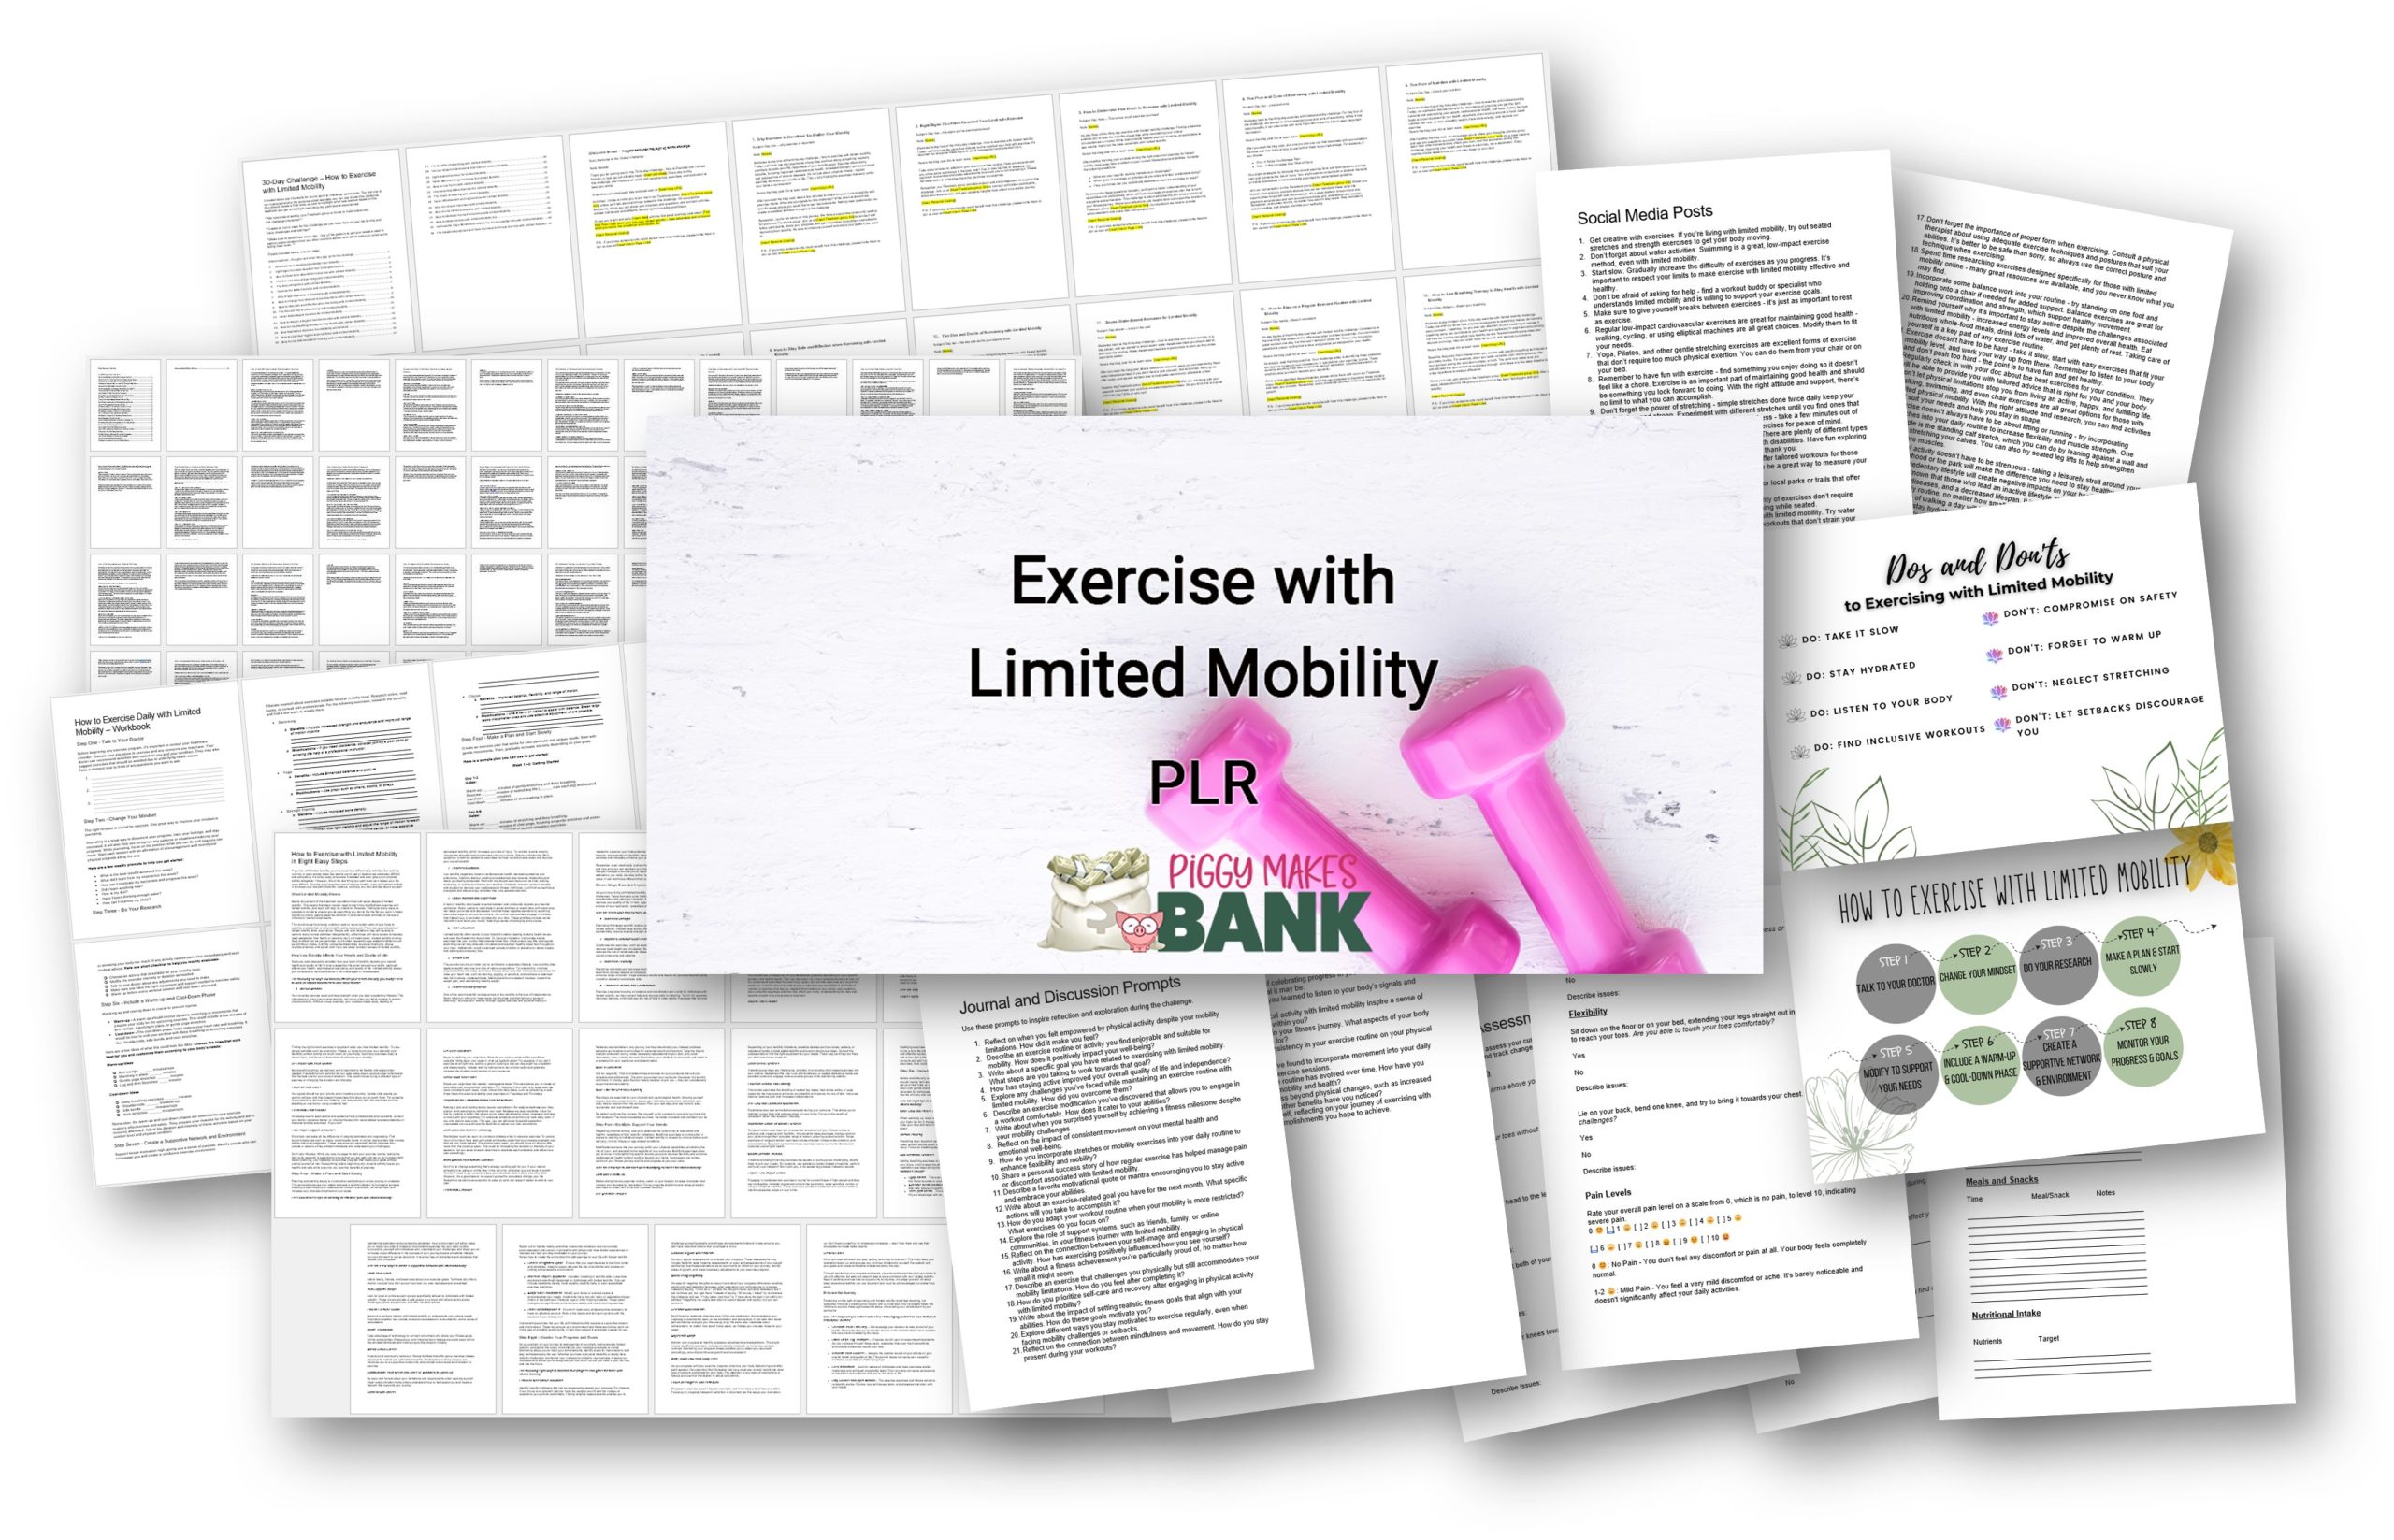 Exercise with Limited Mobility PLR